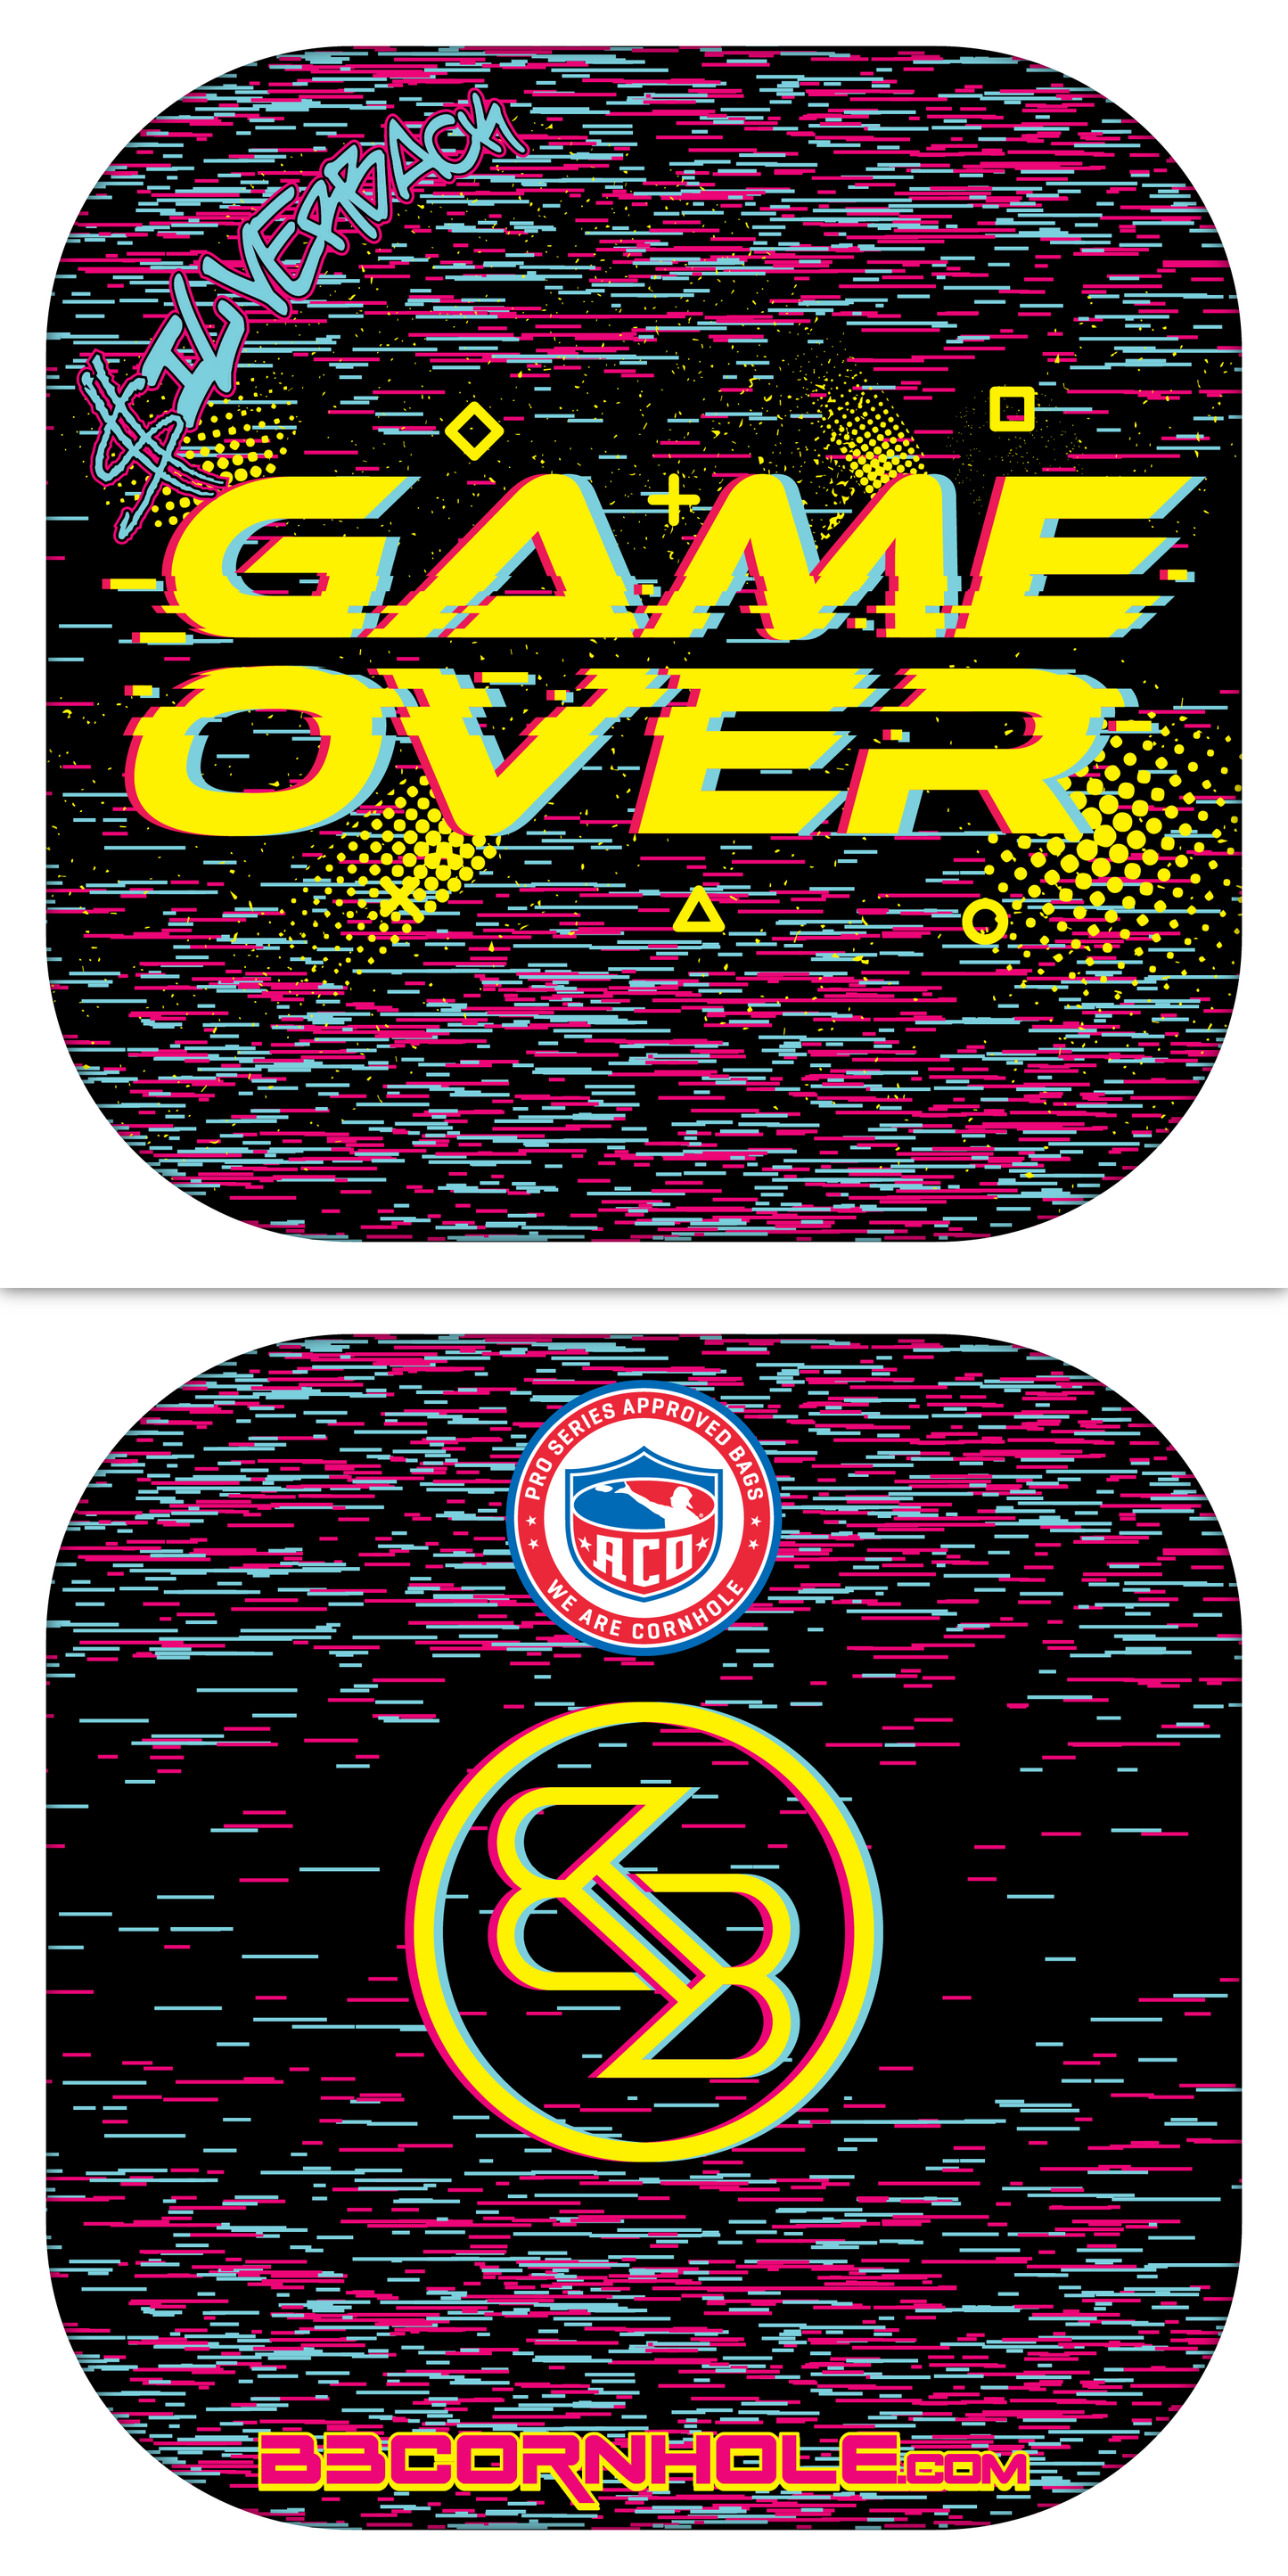 Limited Release _Game Over NEONS